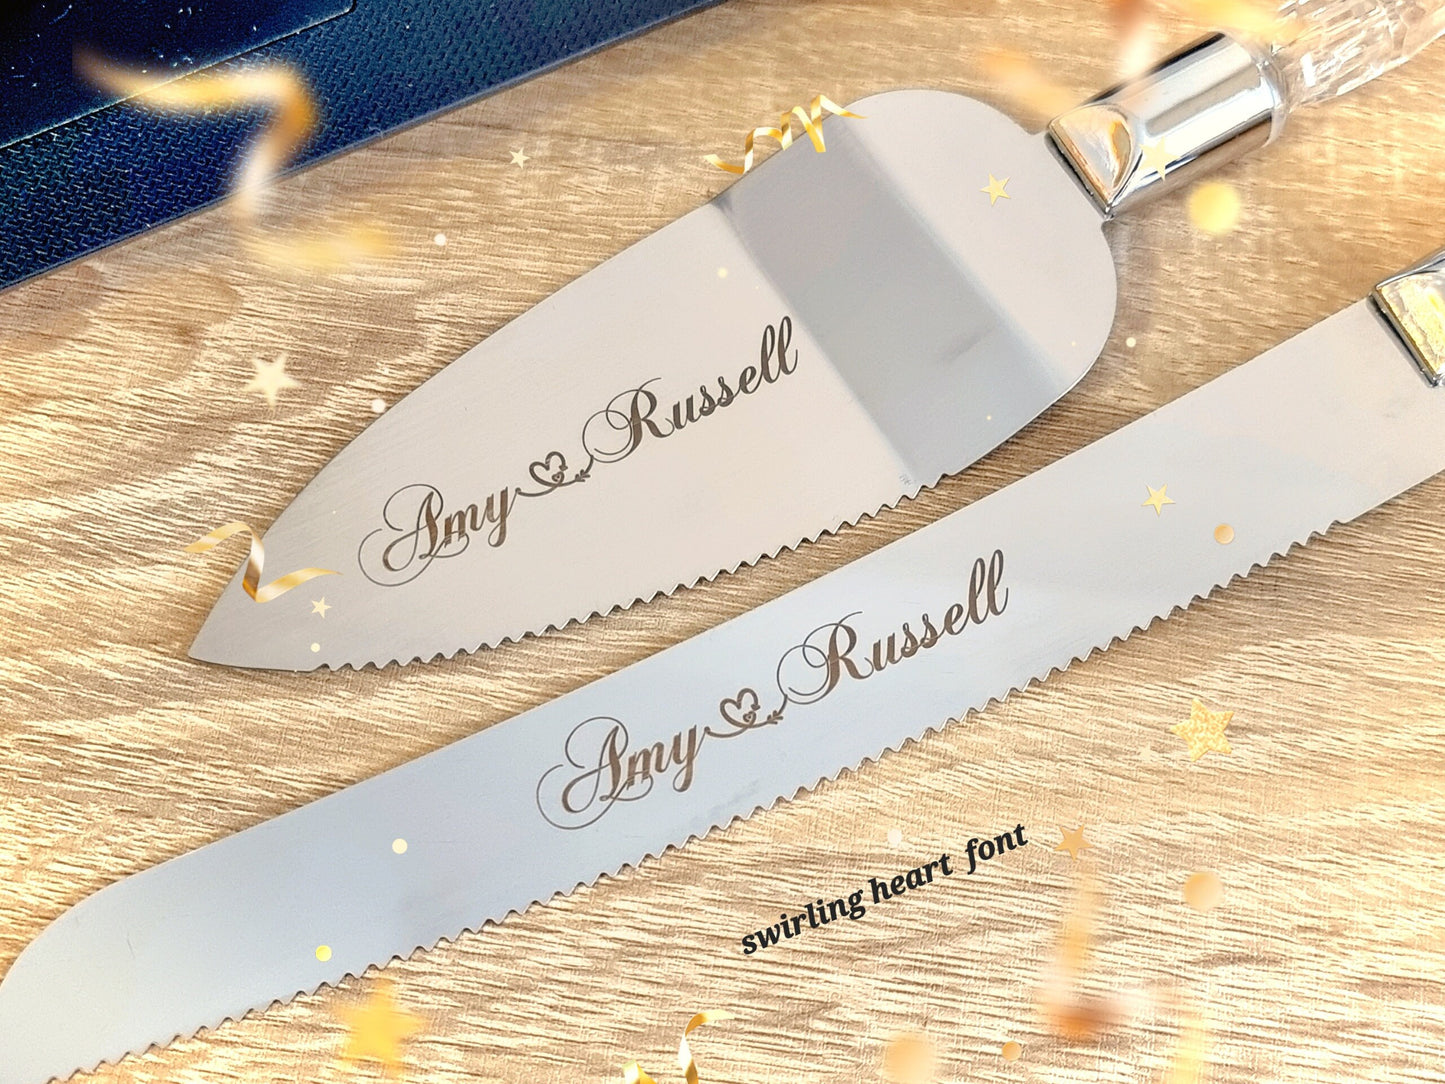 Wedding Cake Server set, Personlised Cake server Set for Wedding Birthday Anniversary Parties For All Occasions